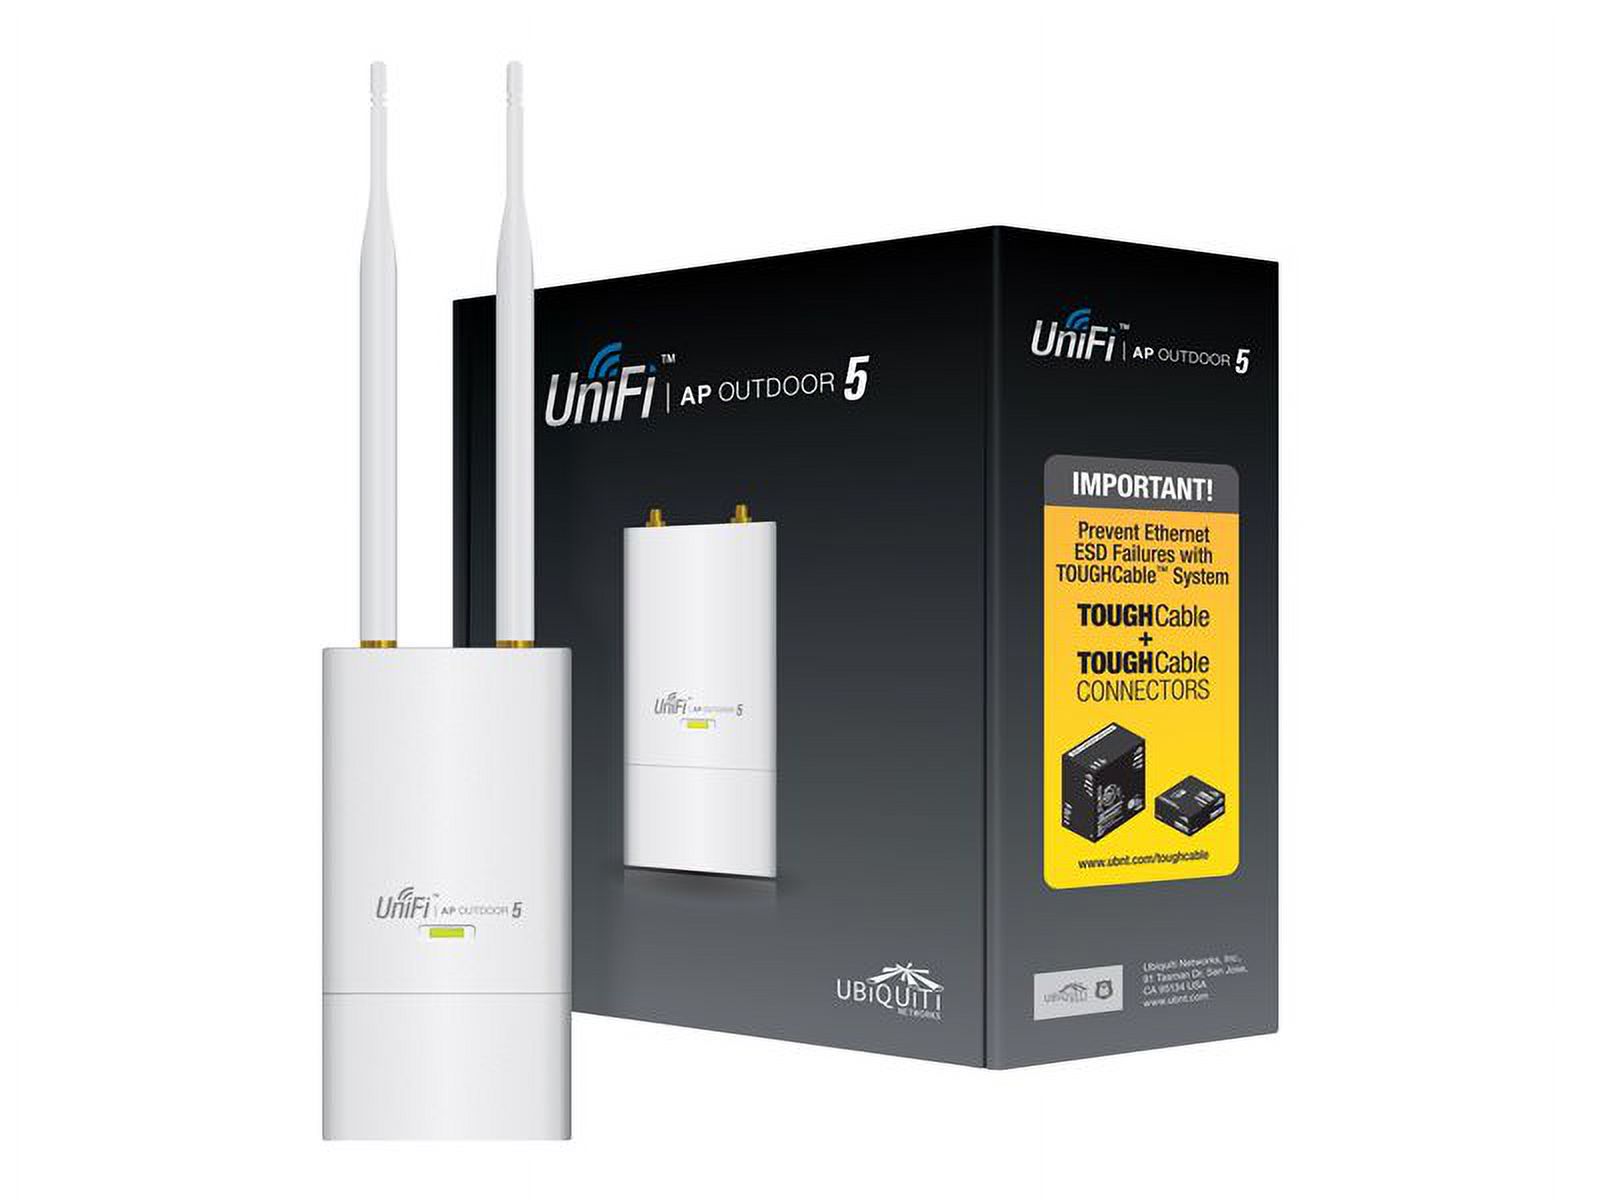 Ubiquiti UniFi UAP-Outdoor5 IEEE 802.11n 300 Mbit/s Wireless Access Point - image 2 of 16